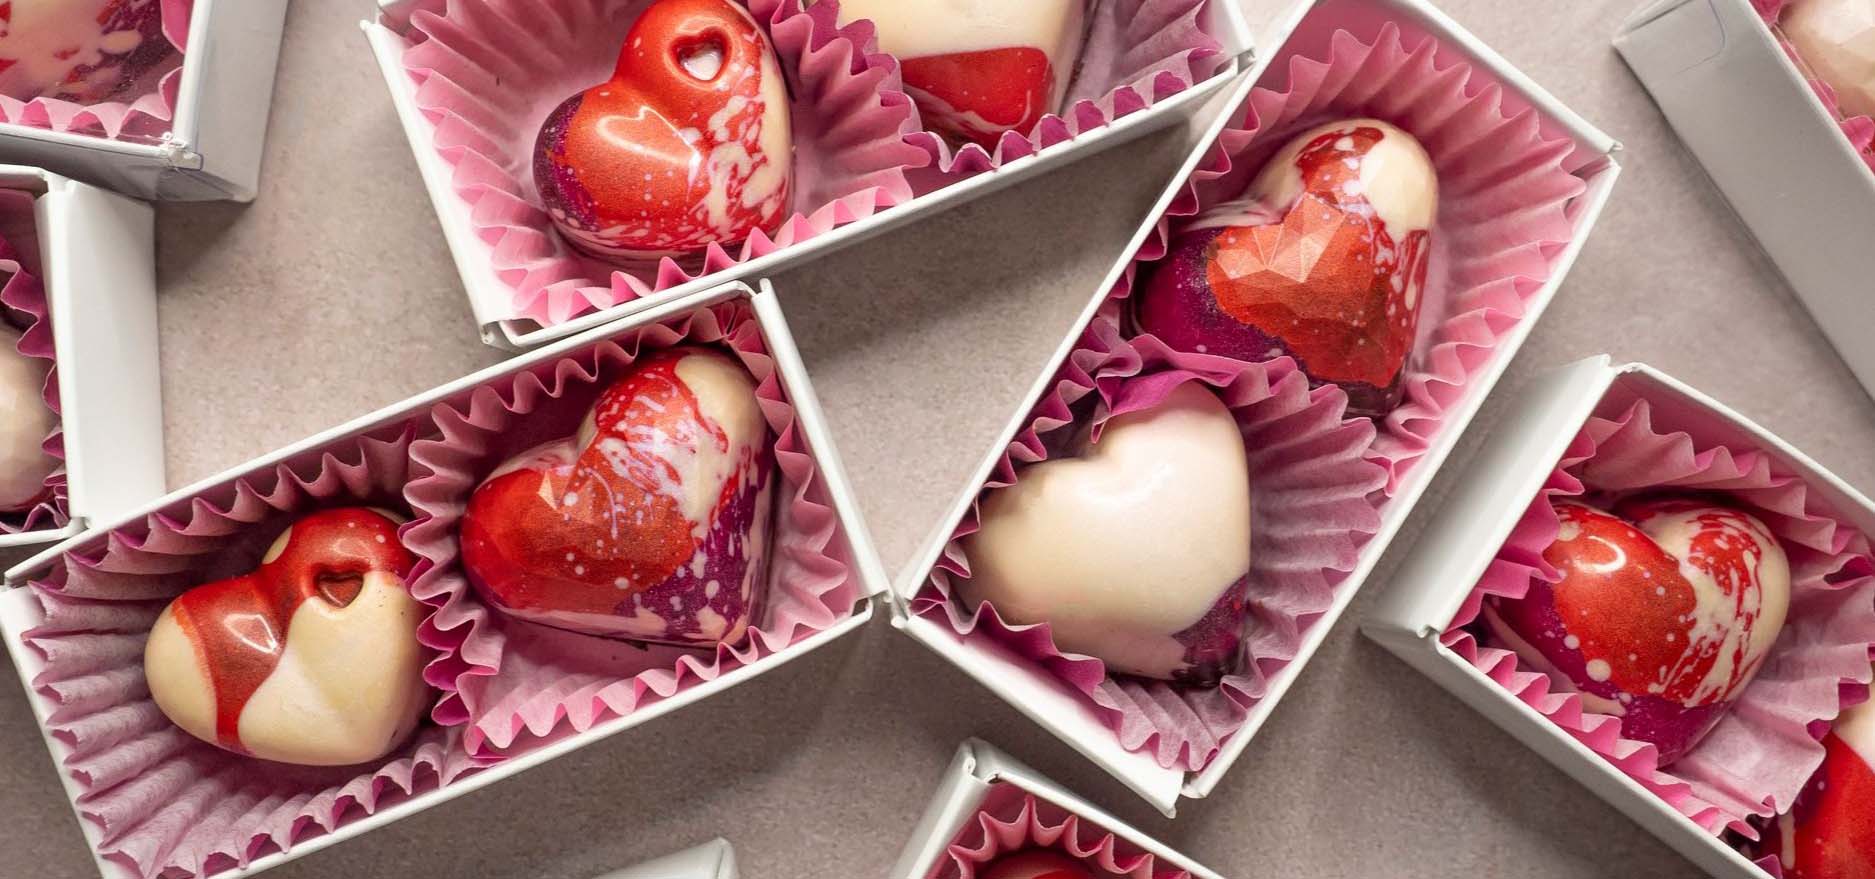 Boxes of heart-shaped red and white chocolates.